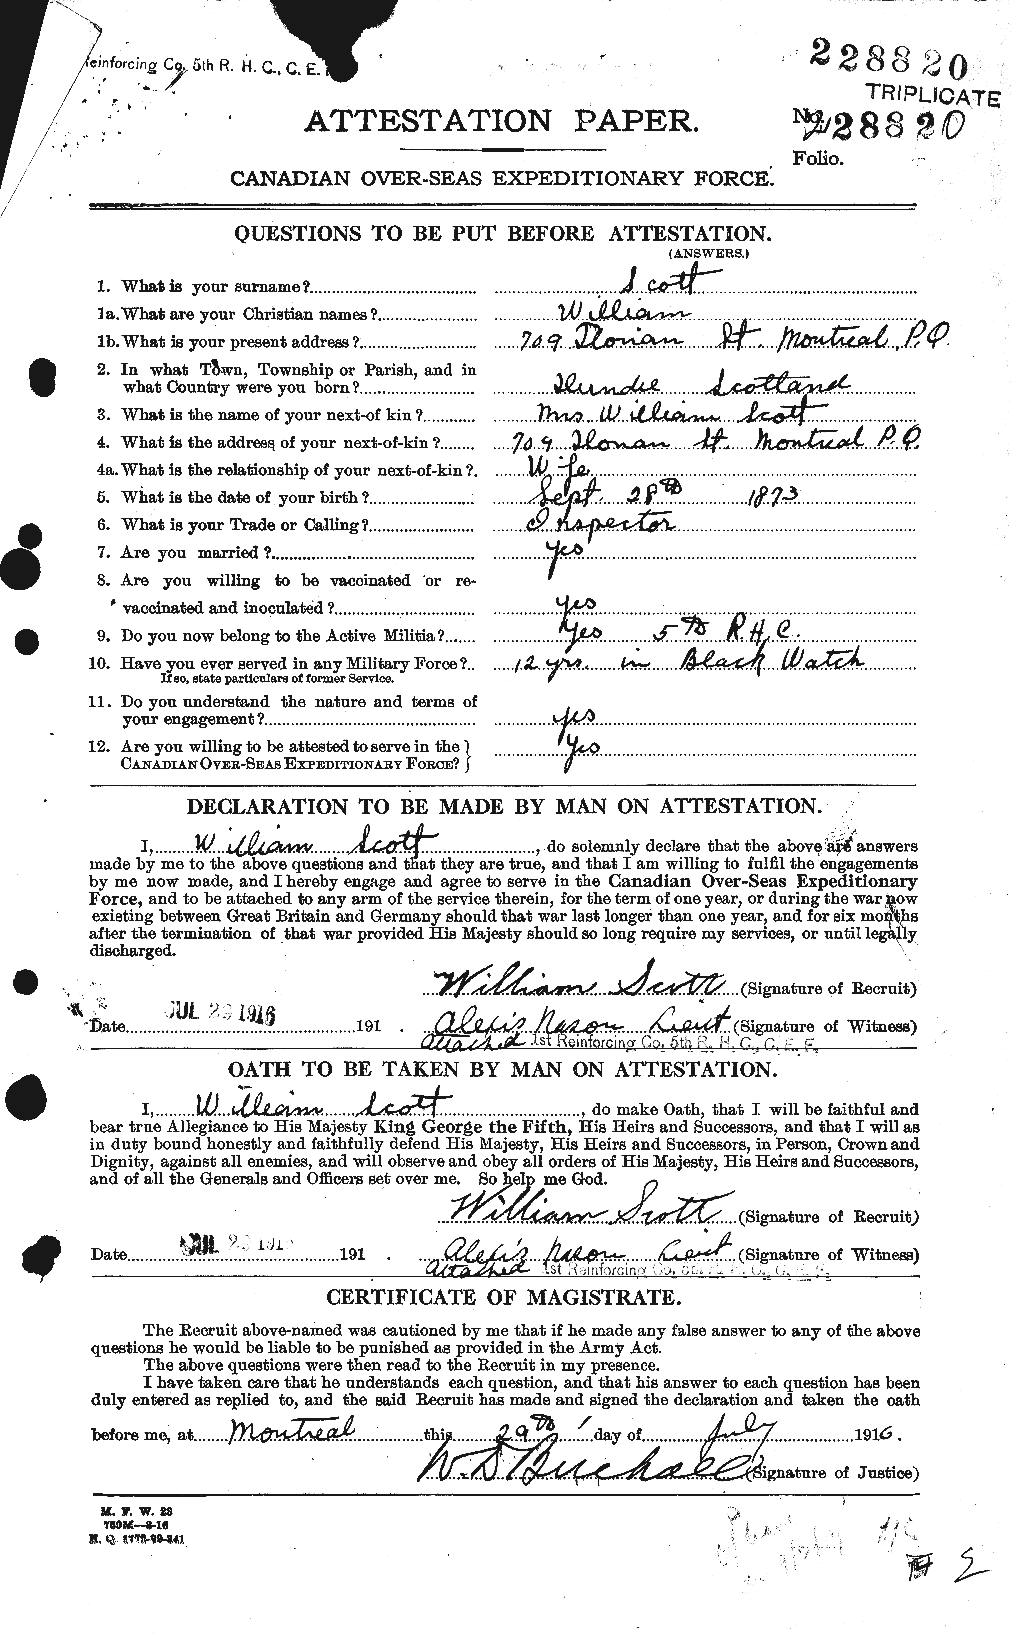 Personnel Records of the First World War - CEF 087360a